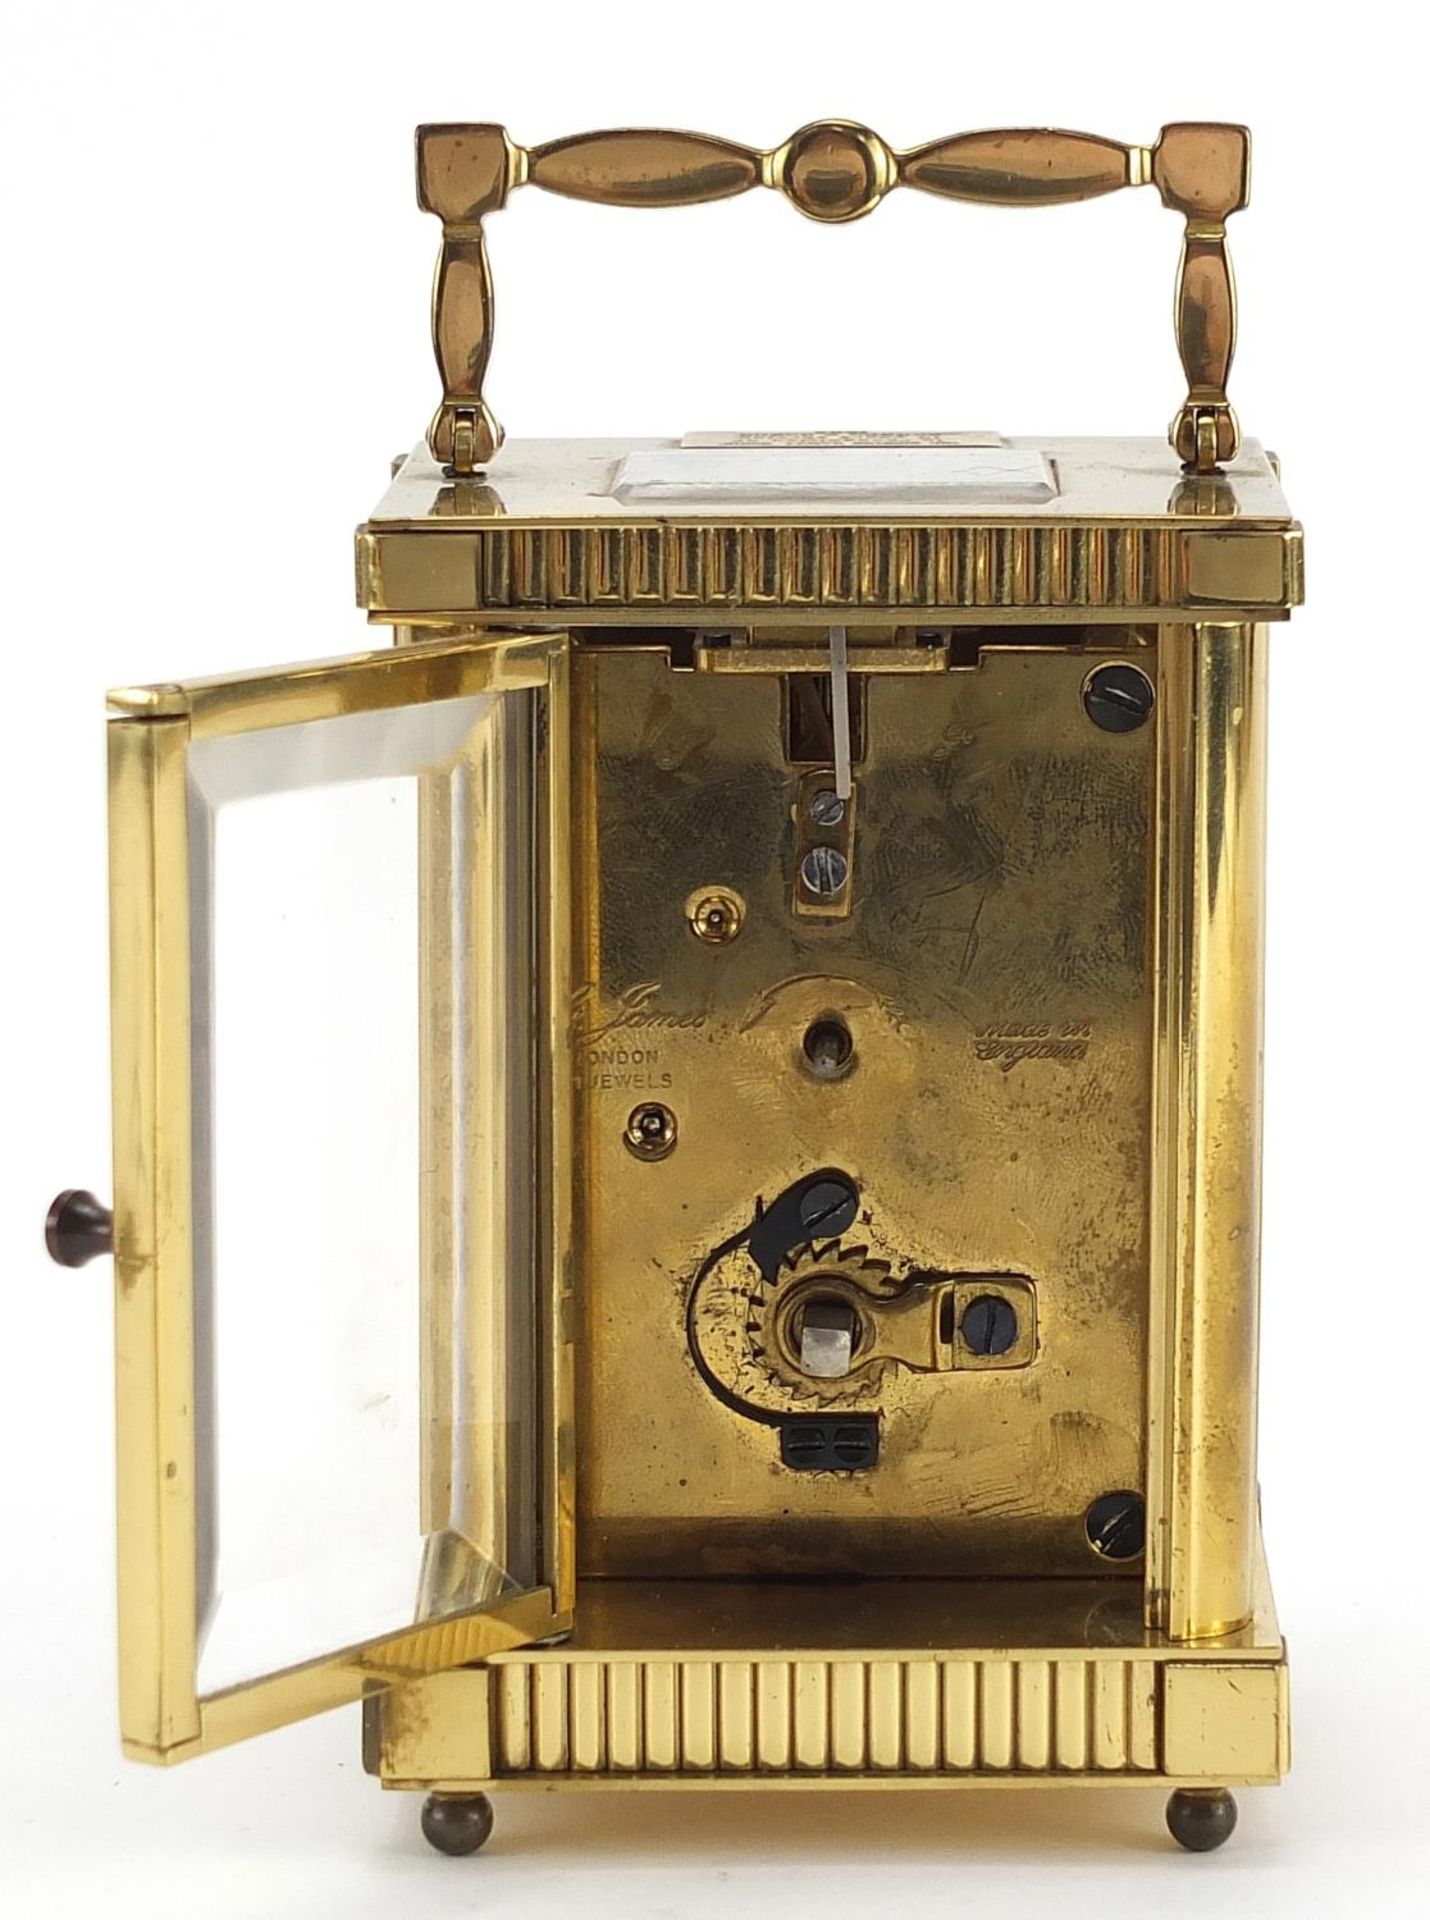 St James brass cased carriage clock with enamelled dial having Roman numerals, 11.5cm high - Image 3 of 6